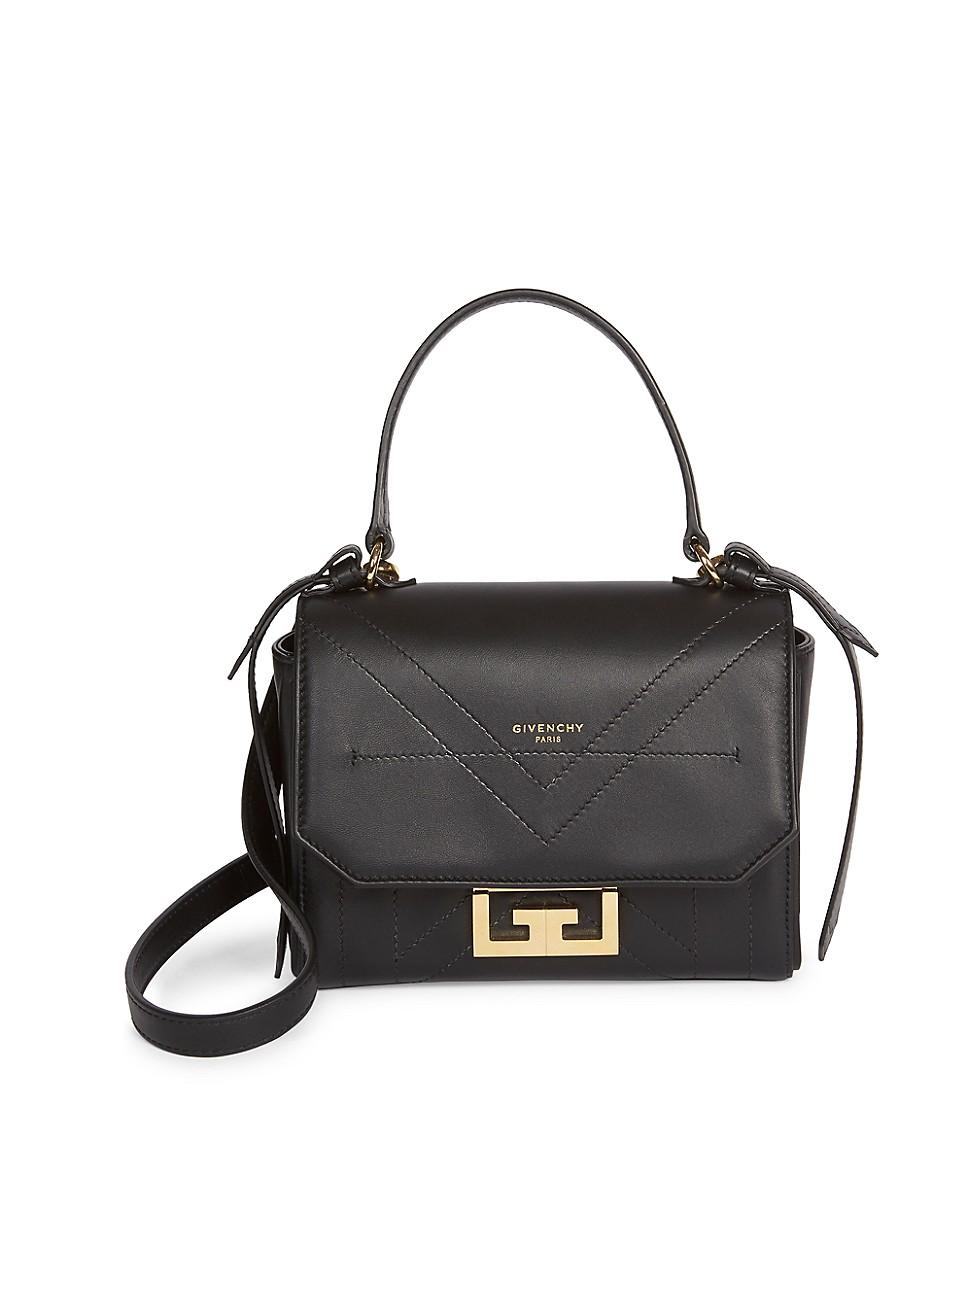 Givenchy Mini Eden Leather Top Handle Bag in Black | Lyst